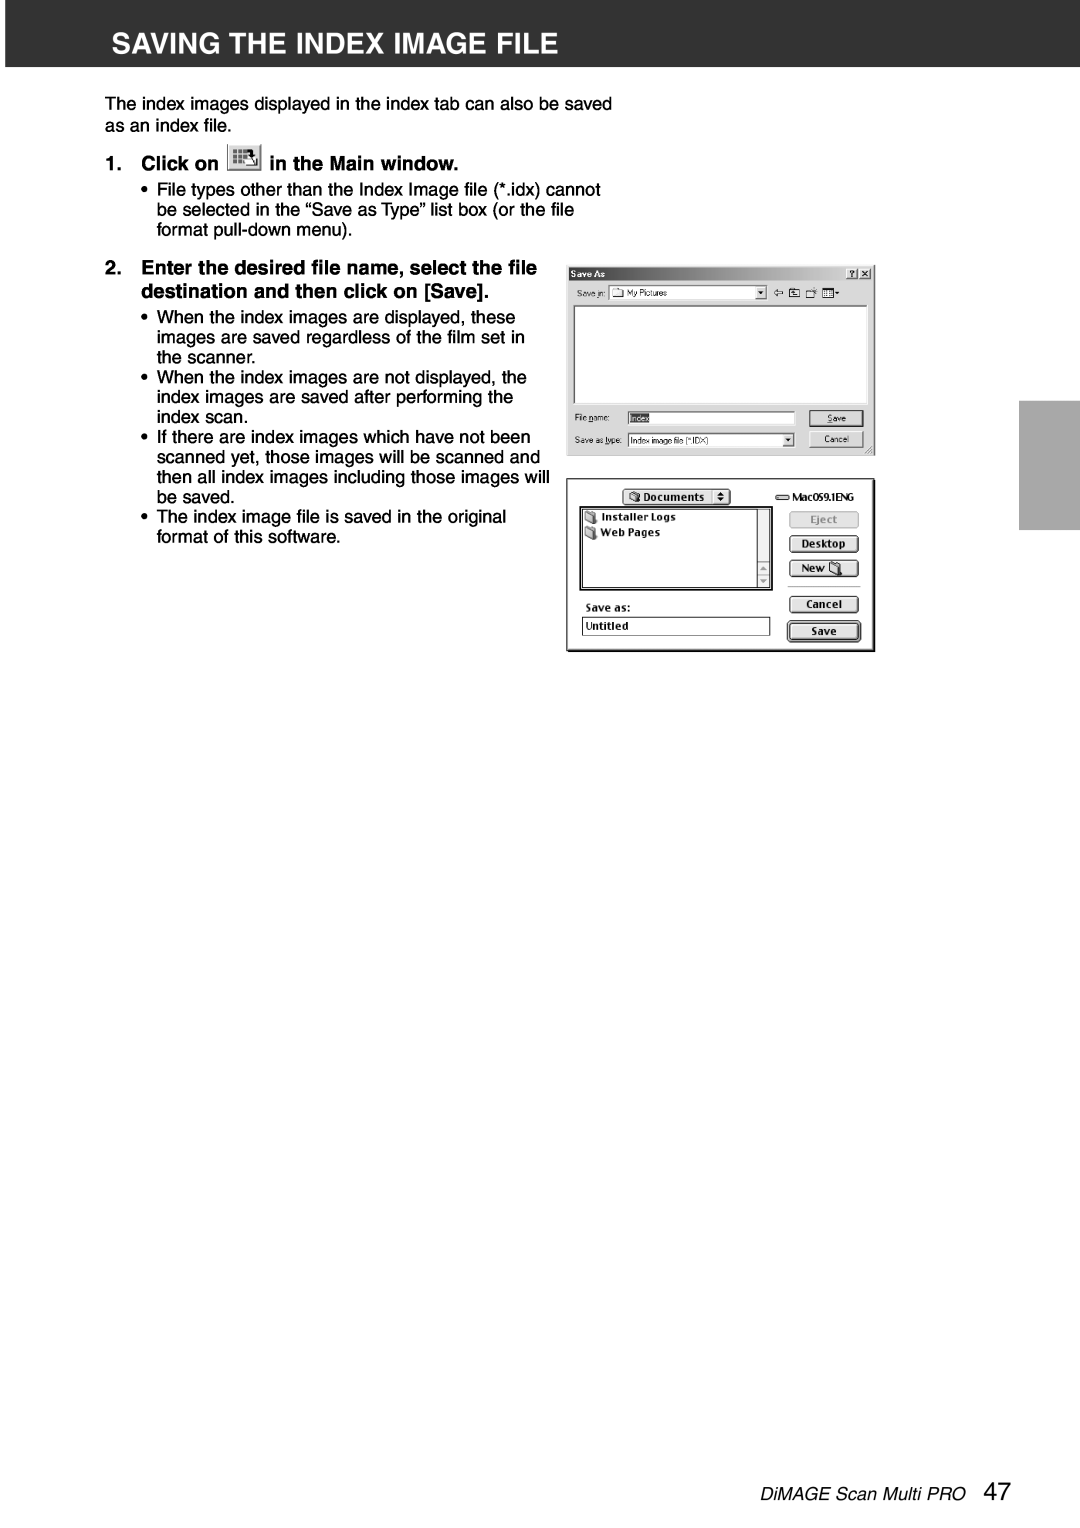 Konica Minolta instruction manual Saving The Index Image File, Click on in the Main window, DiMAGE Scan Multi PRO 